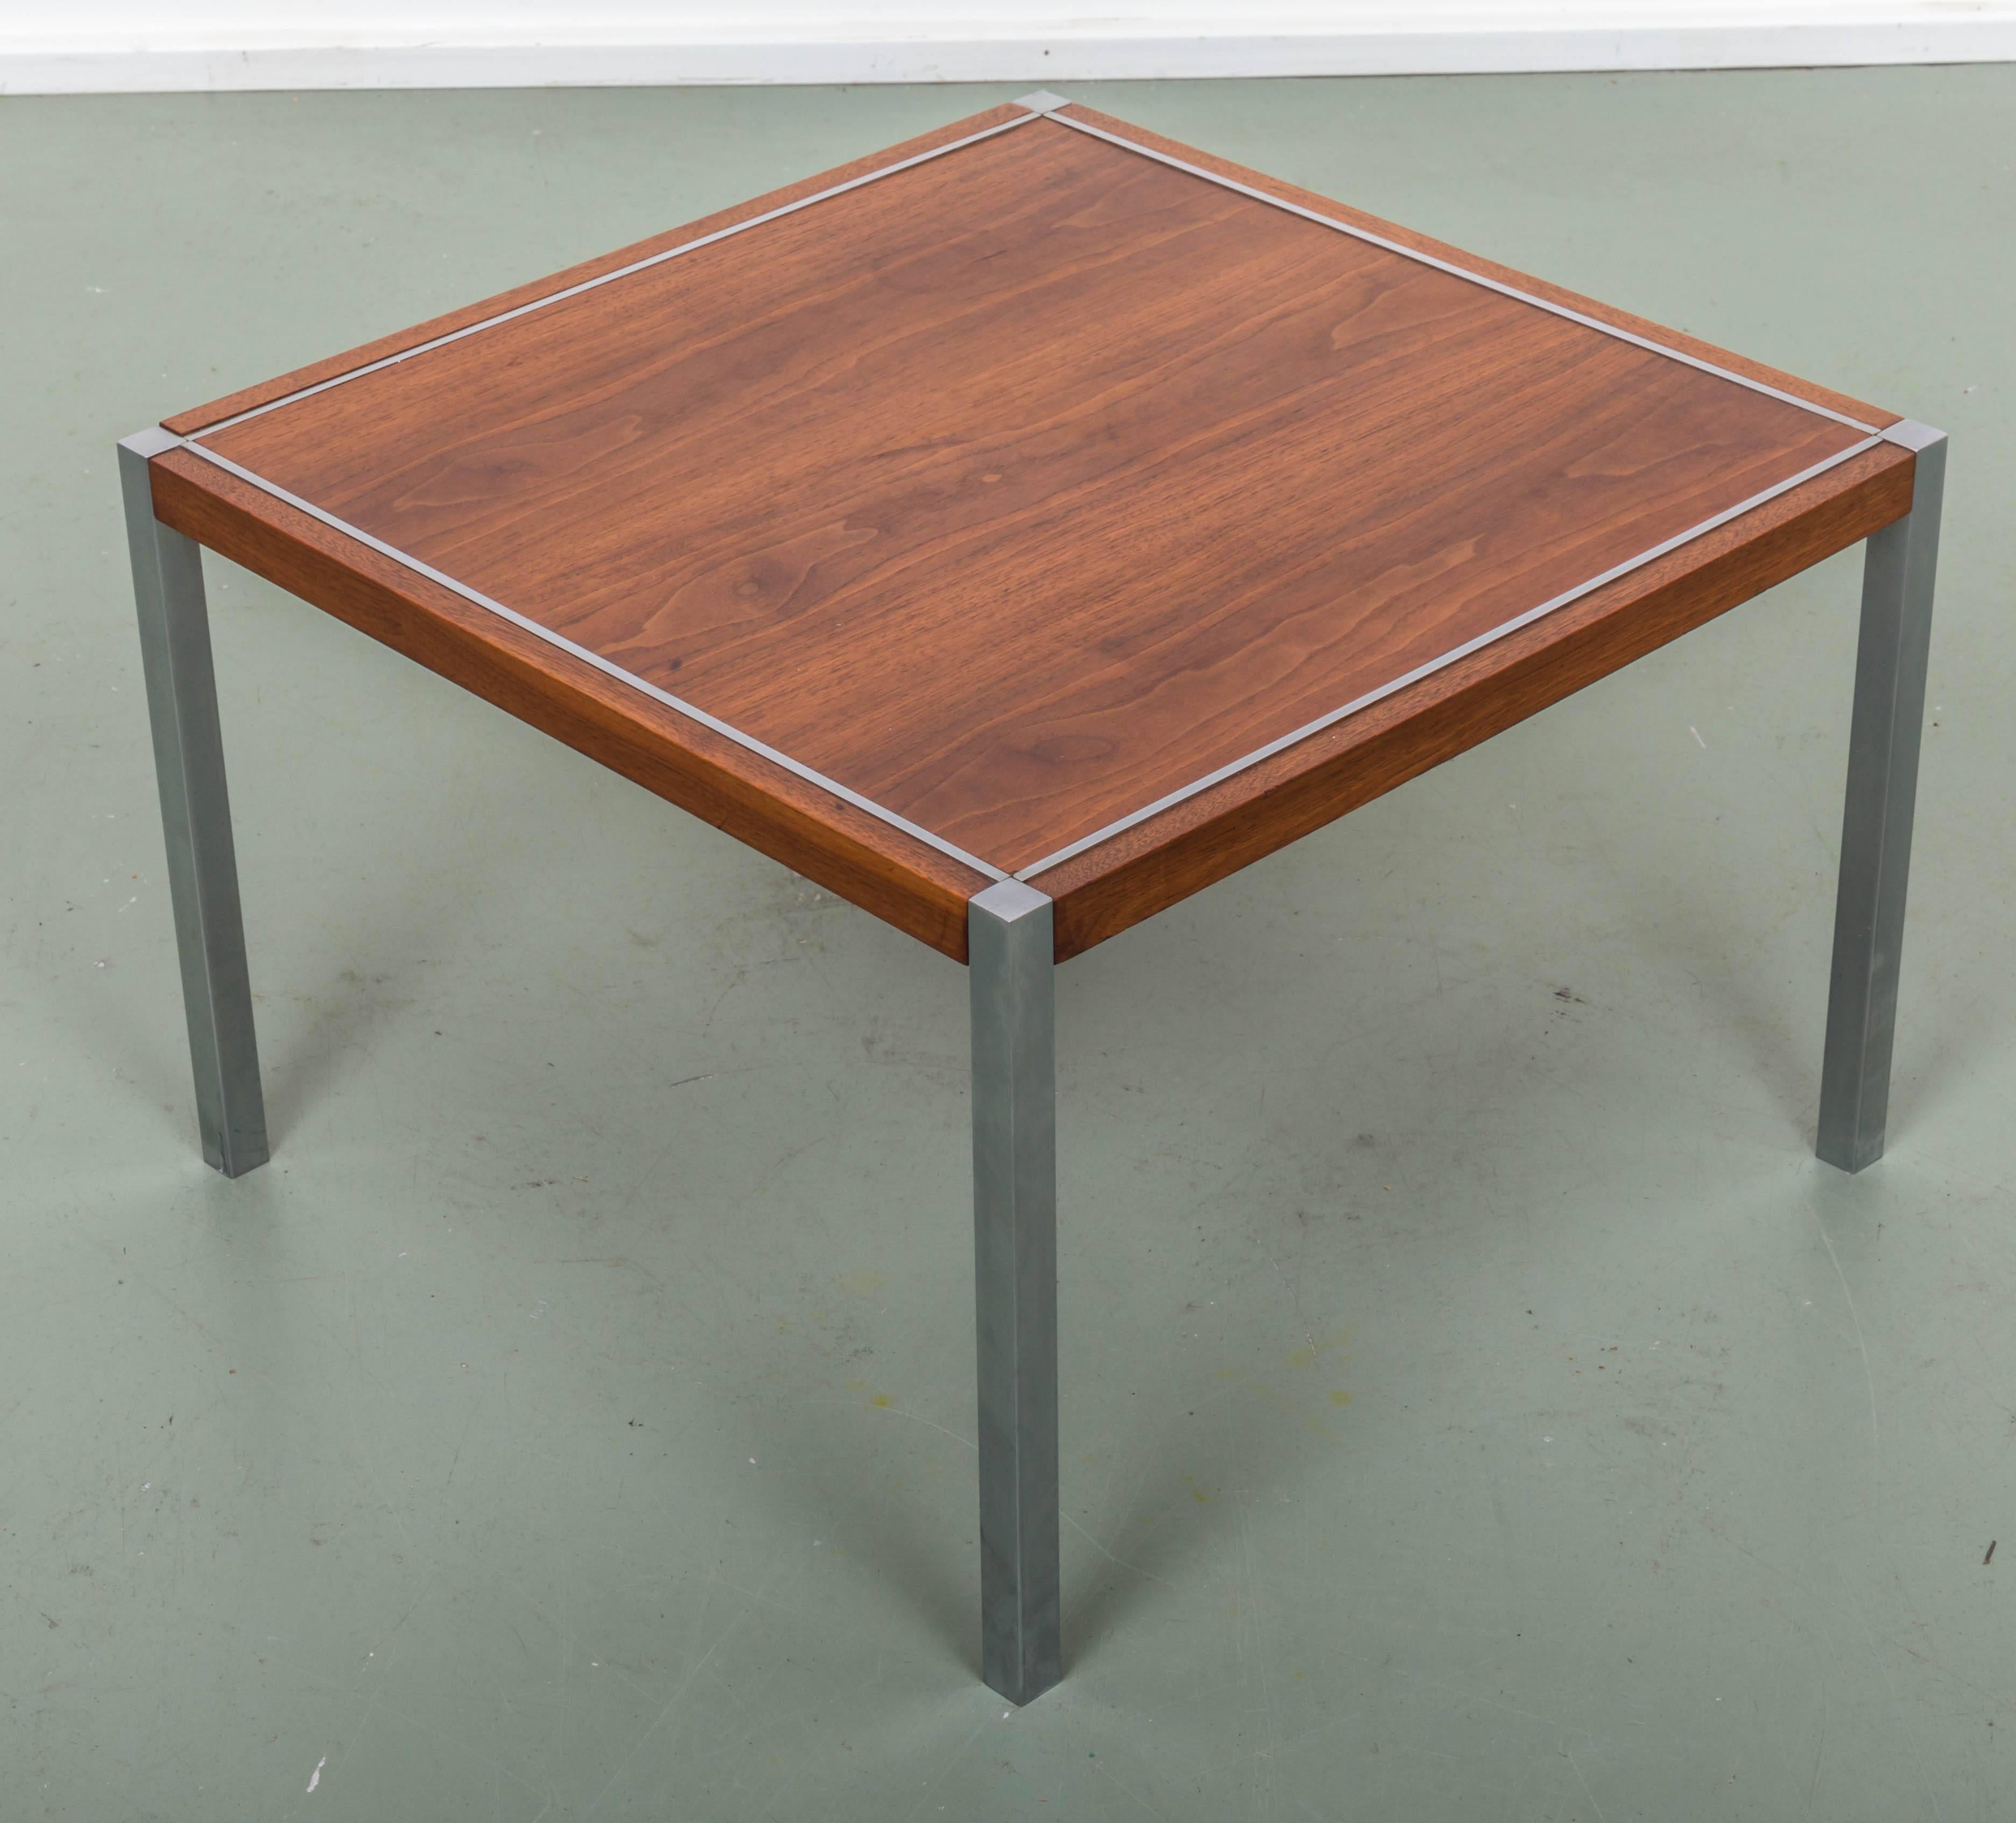 20th Century Pair of Walnut Side Tables by Richard Schultz for Knoll